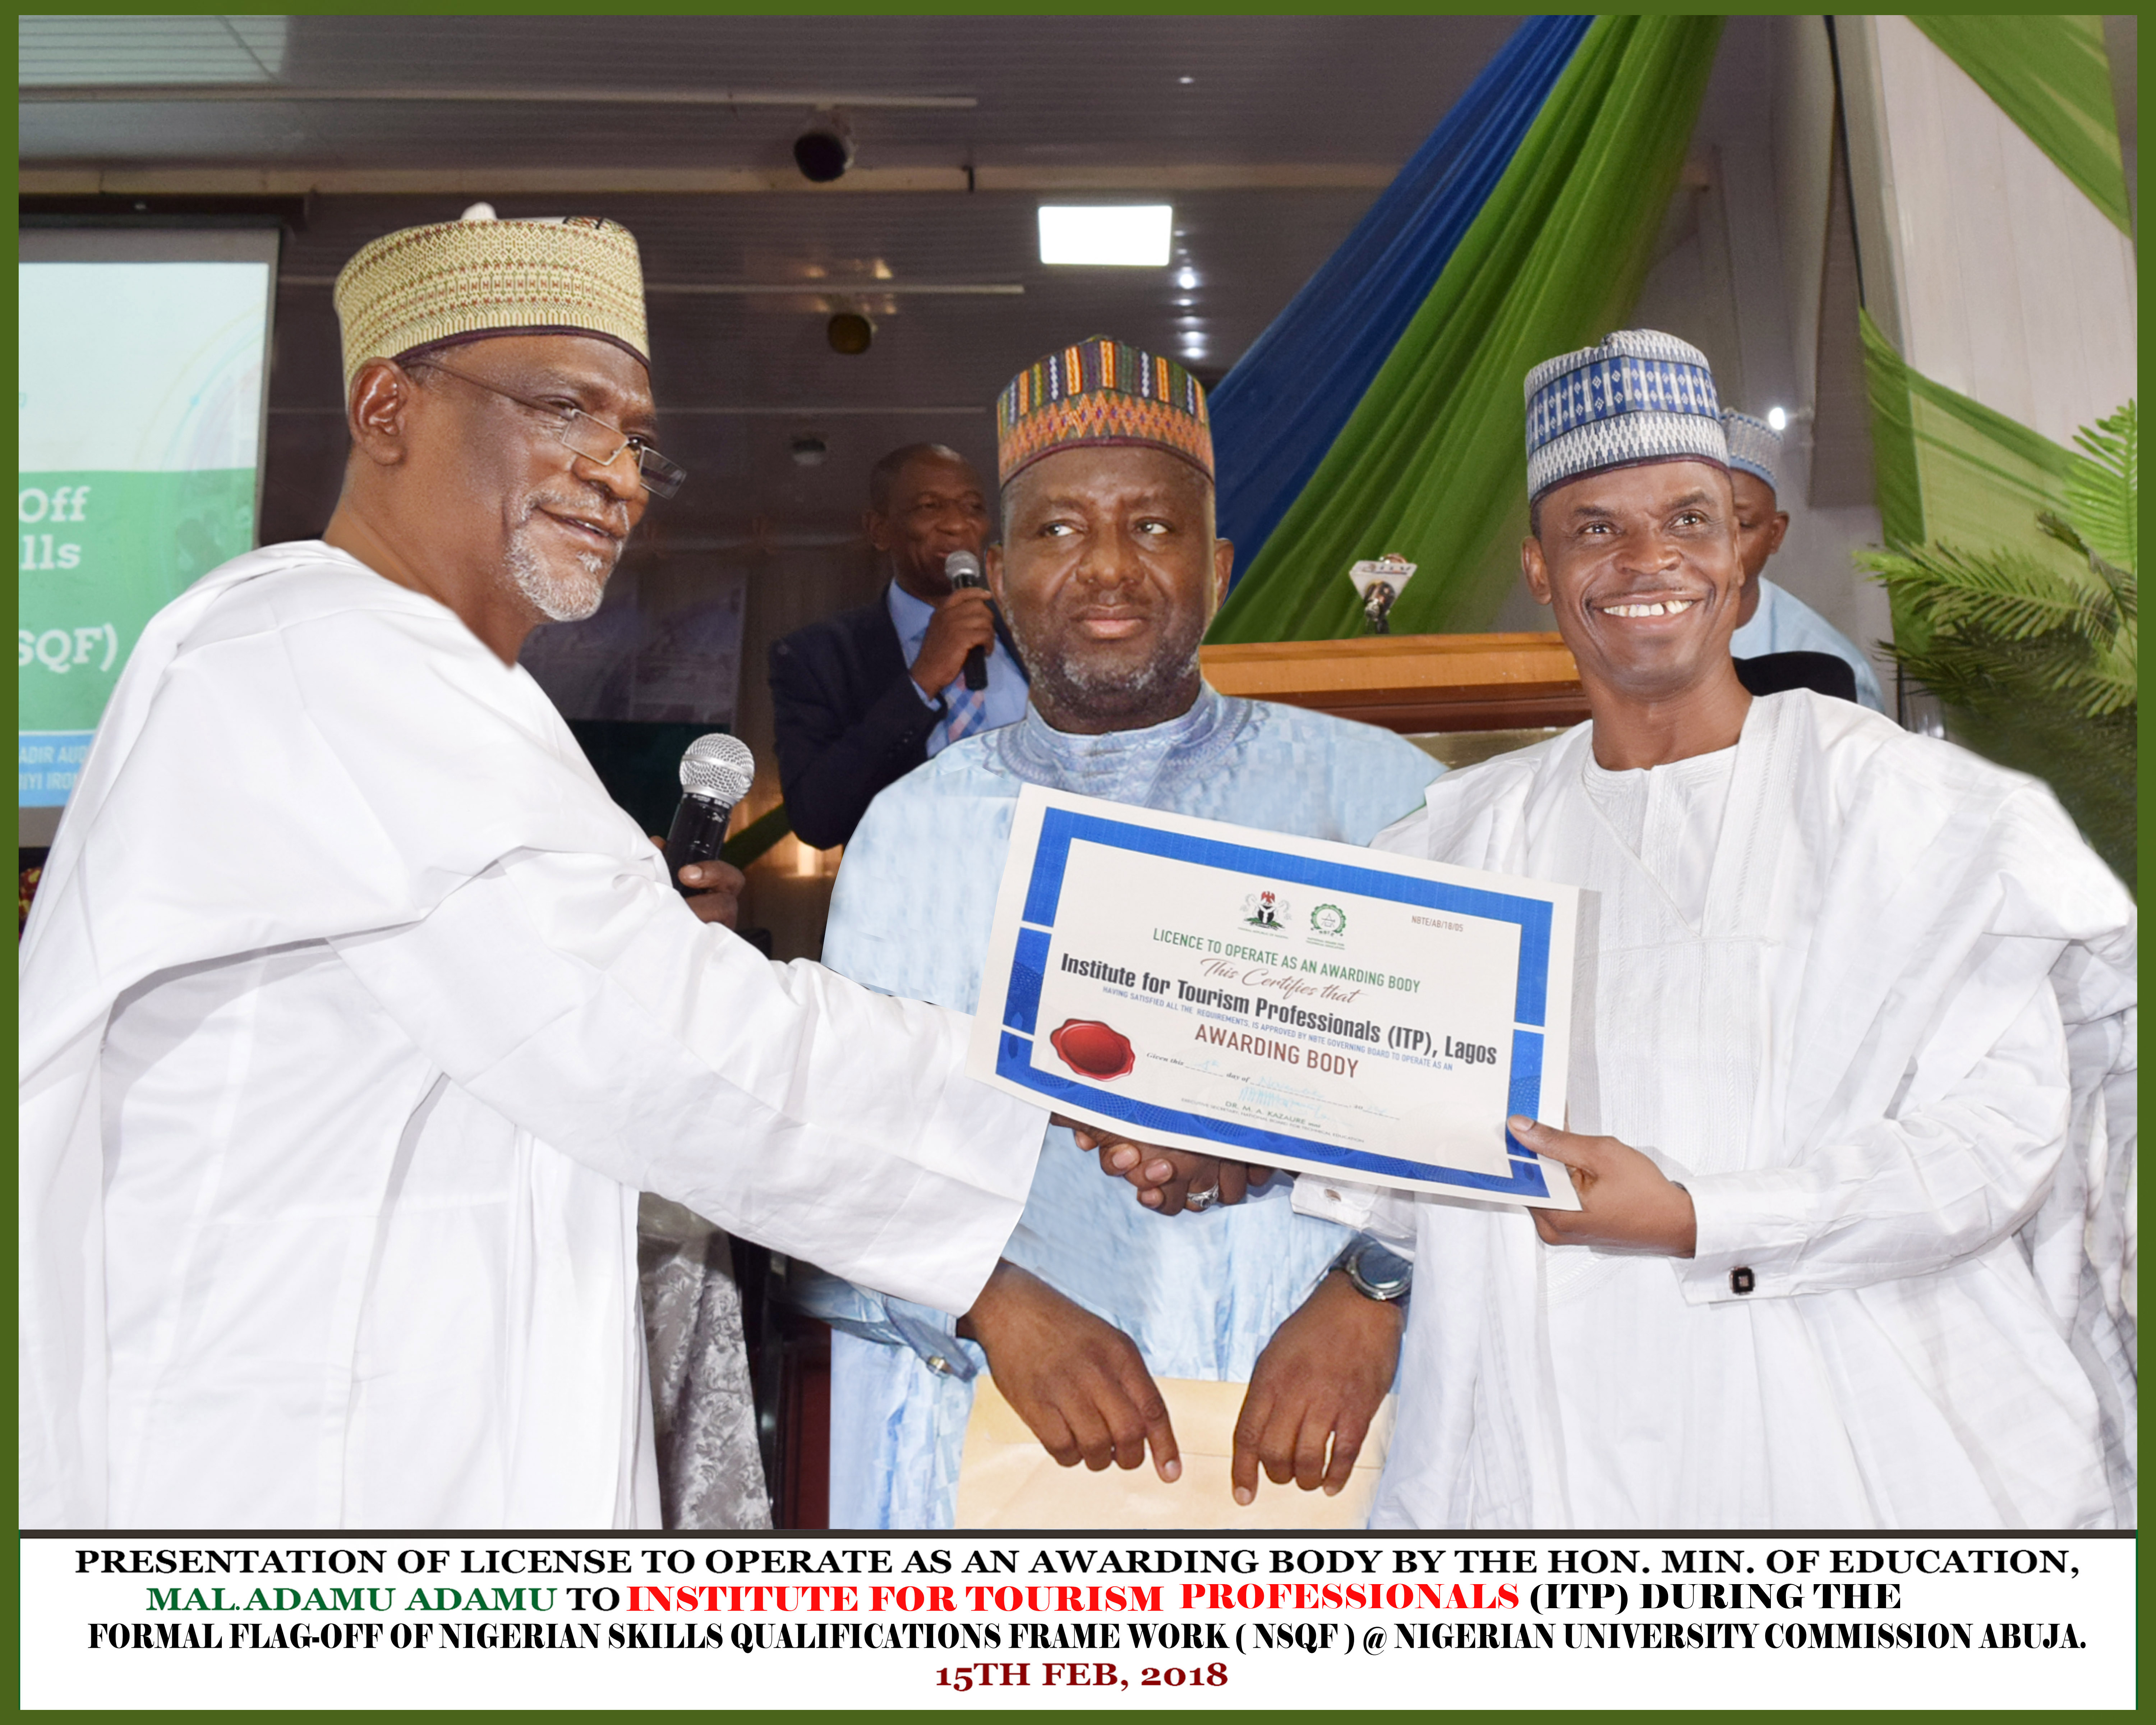 Presentation of License to Operate as an Awarding Body by Hon. Minister of Education